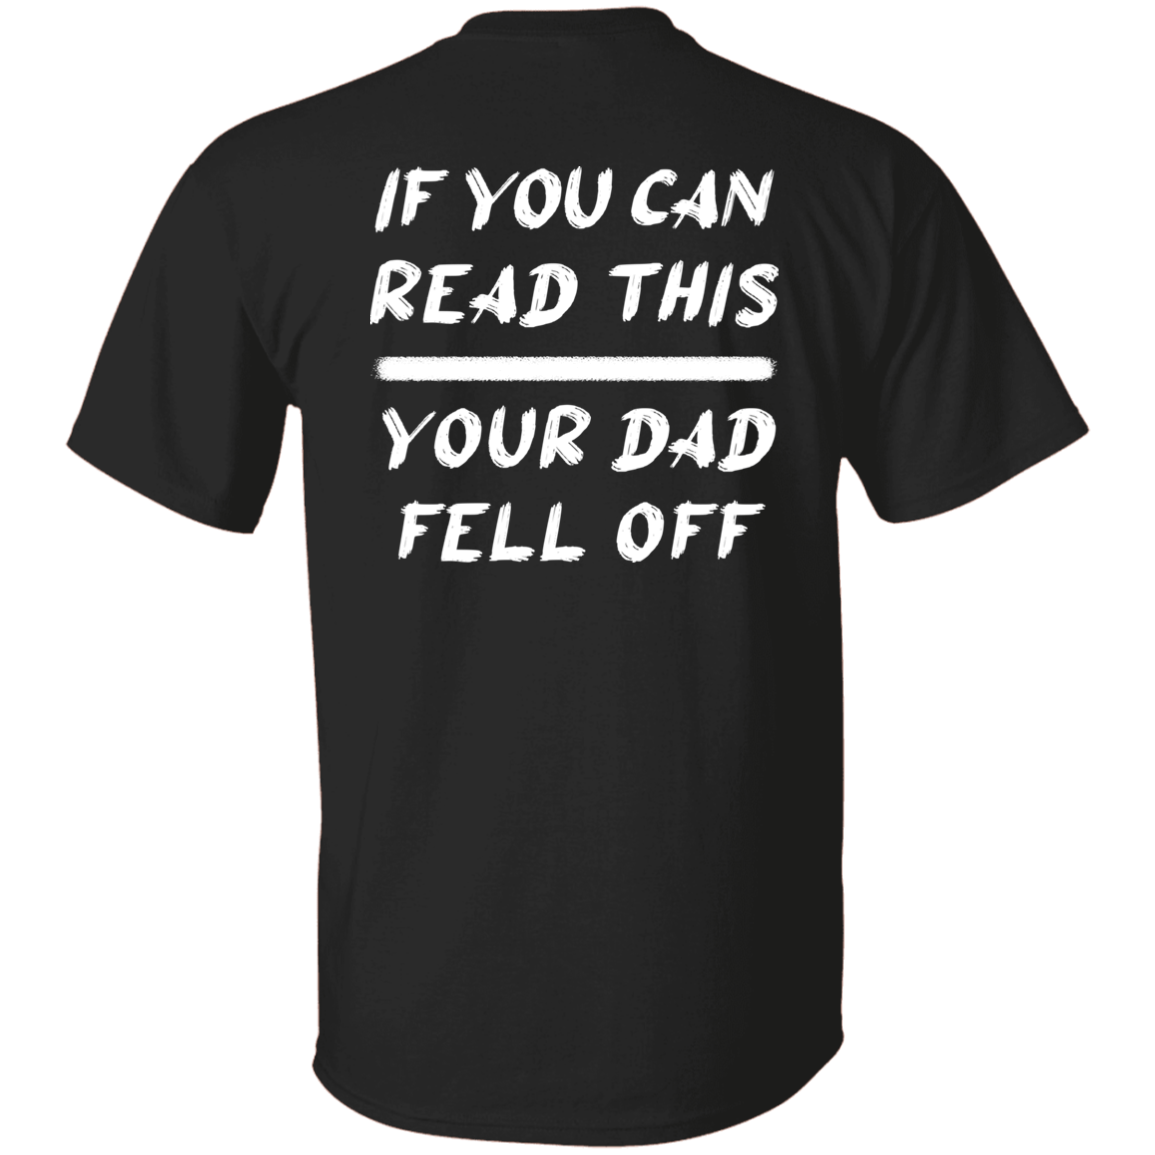 If you can read this your Dad fell off back shirt - Endastore.com